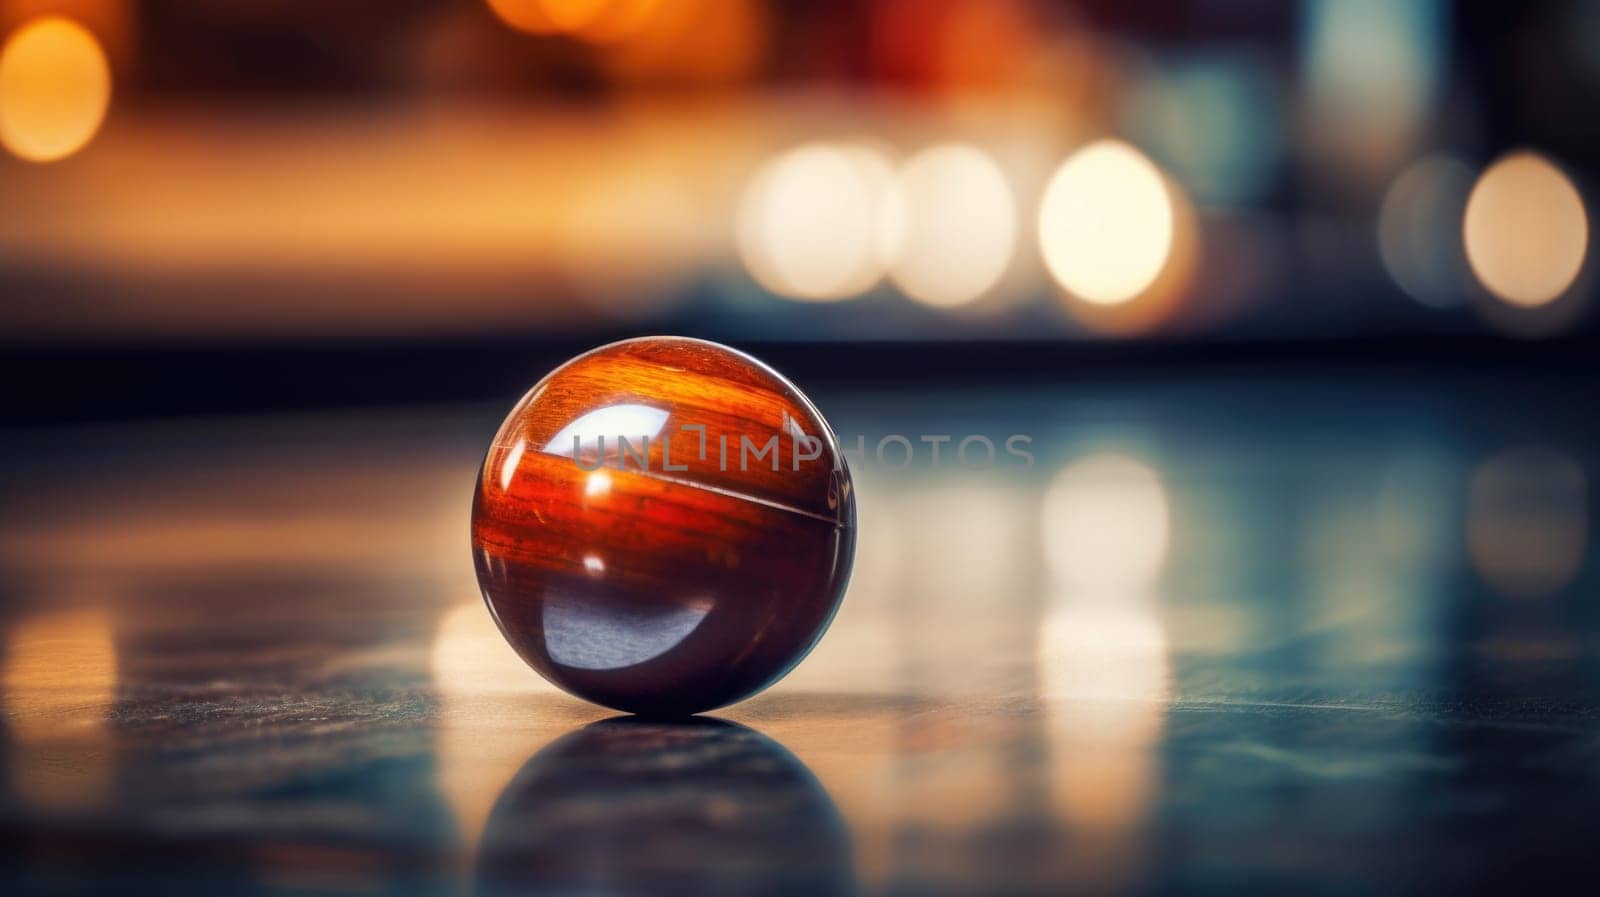 A wooden ball sitting on a table with blurry lights, AI by starush